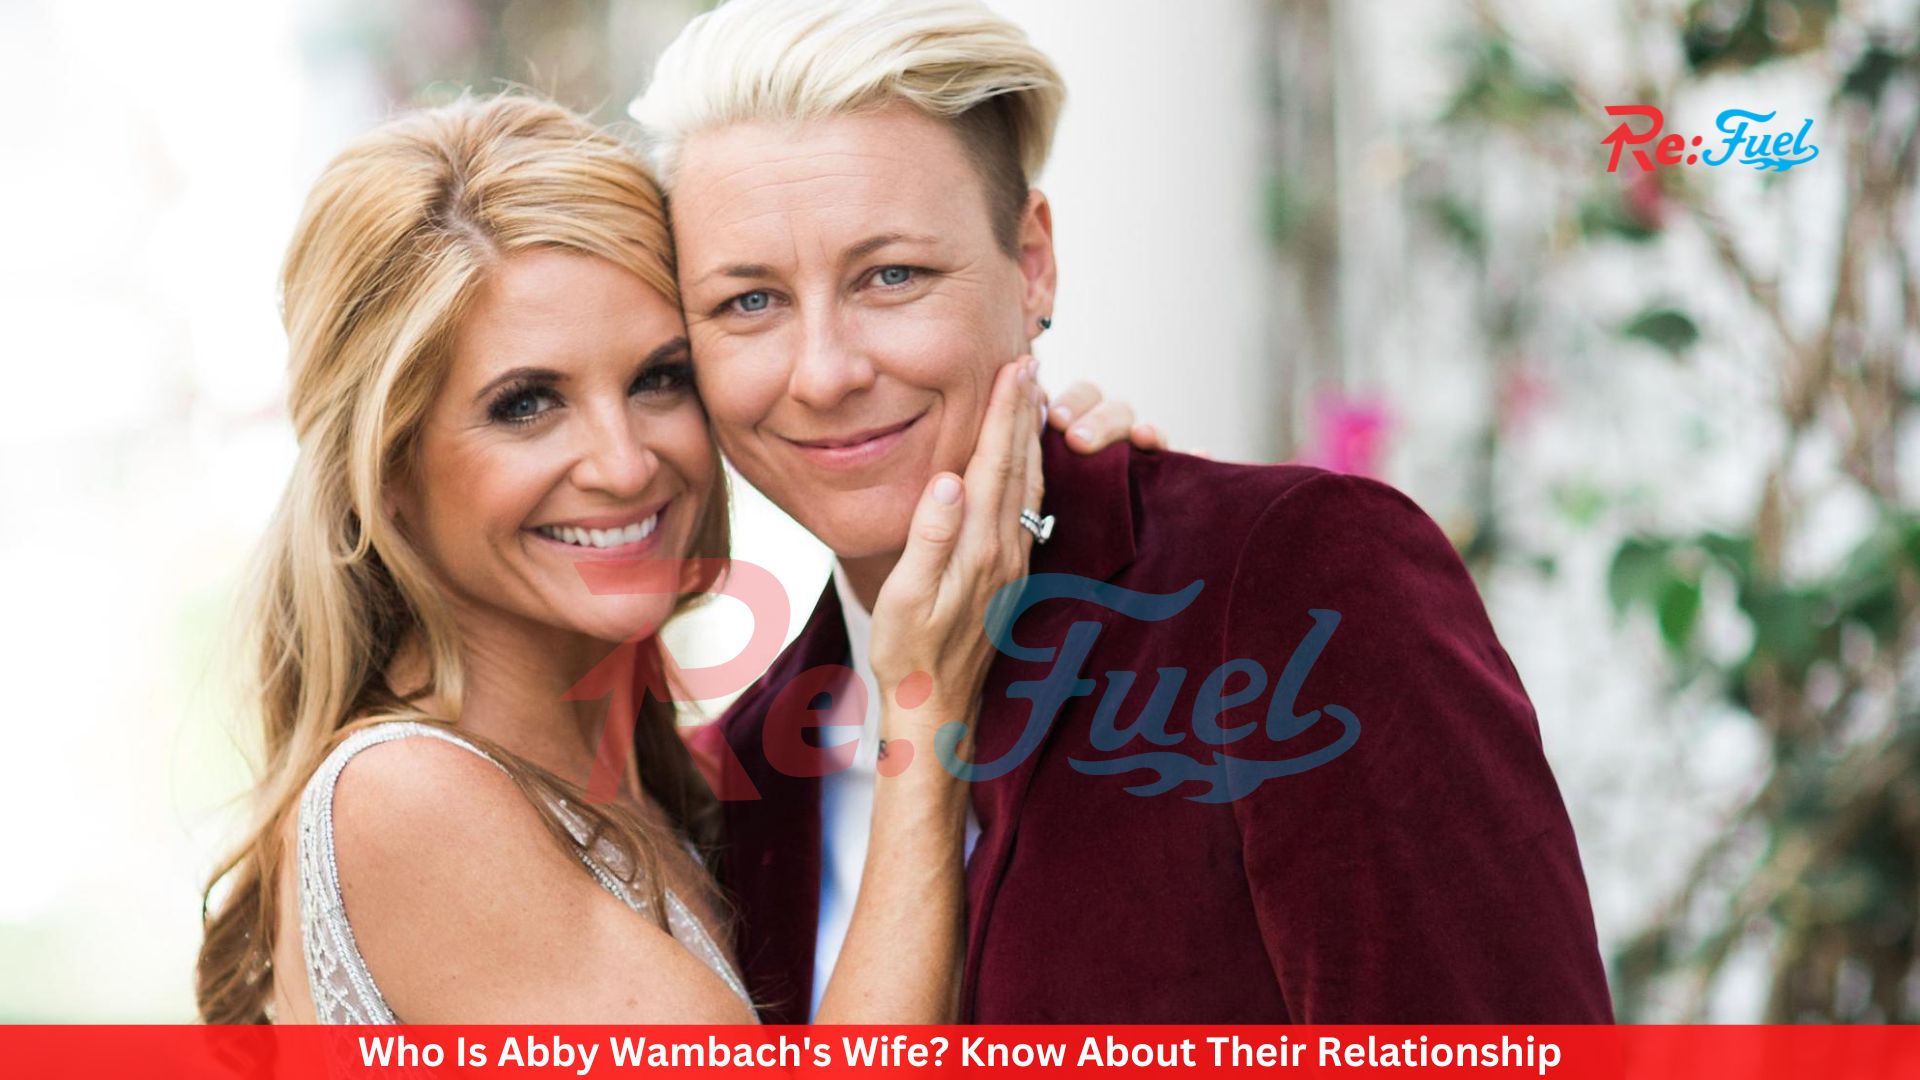 Who Is Abby Wambach's Wife? Know About Their Relationship